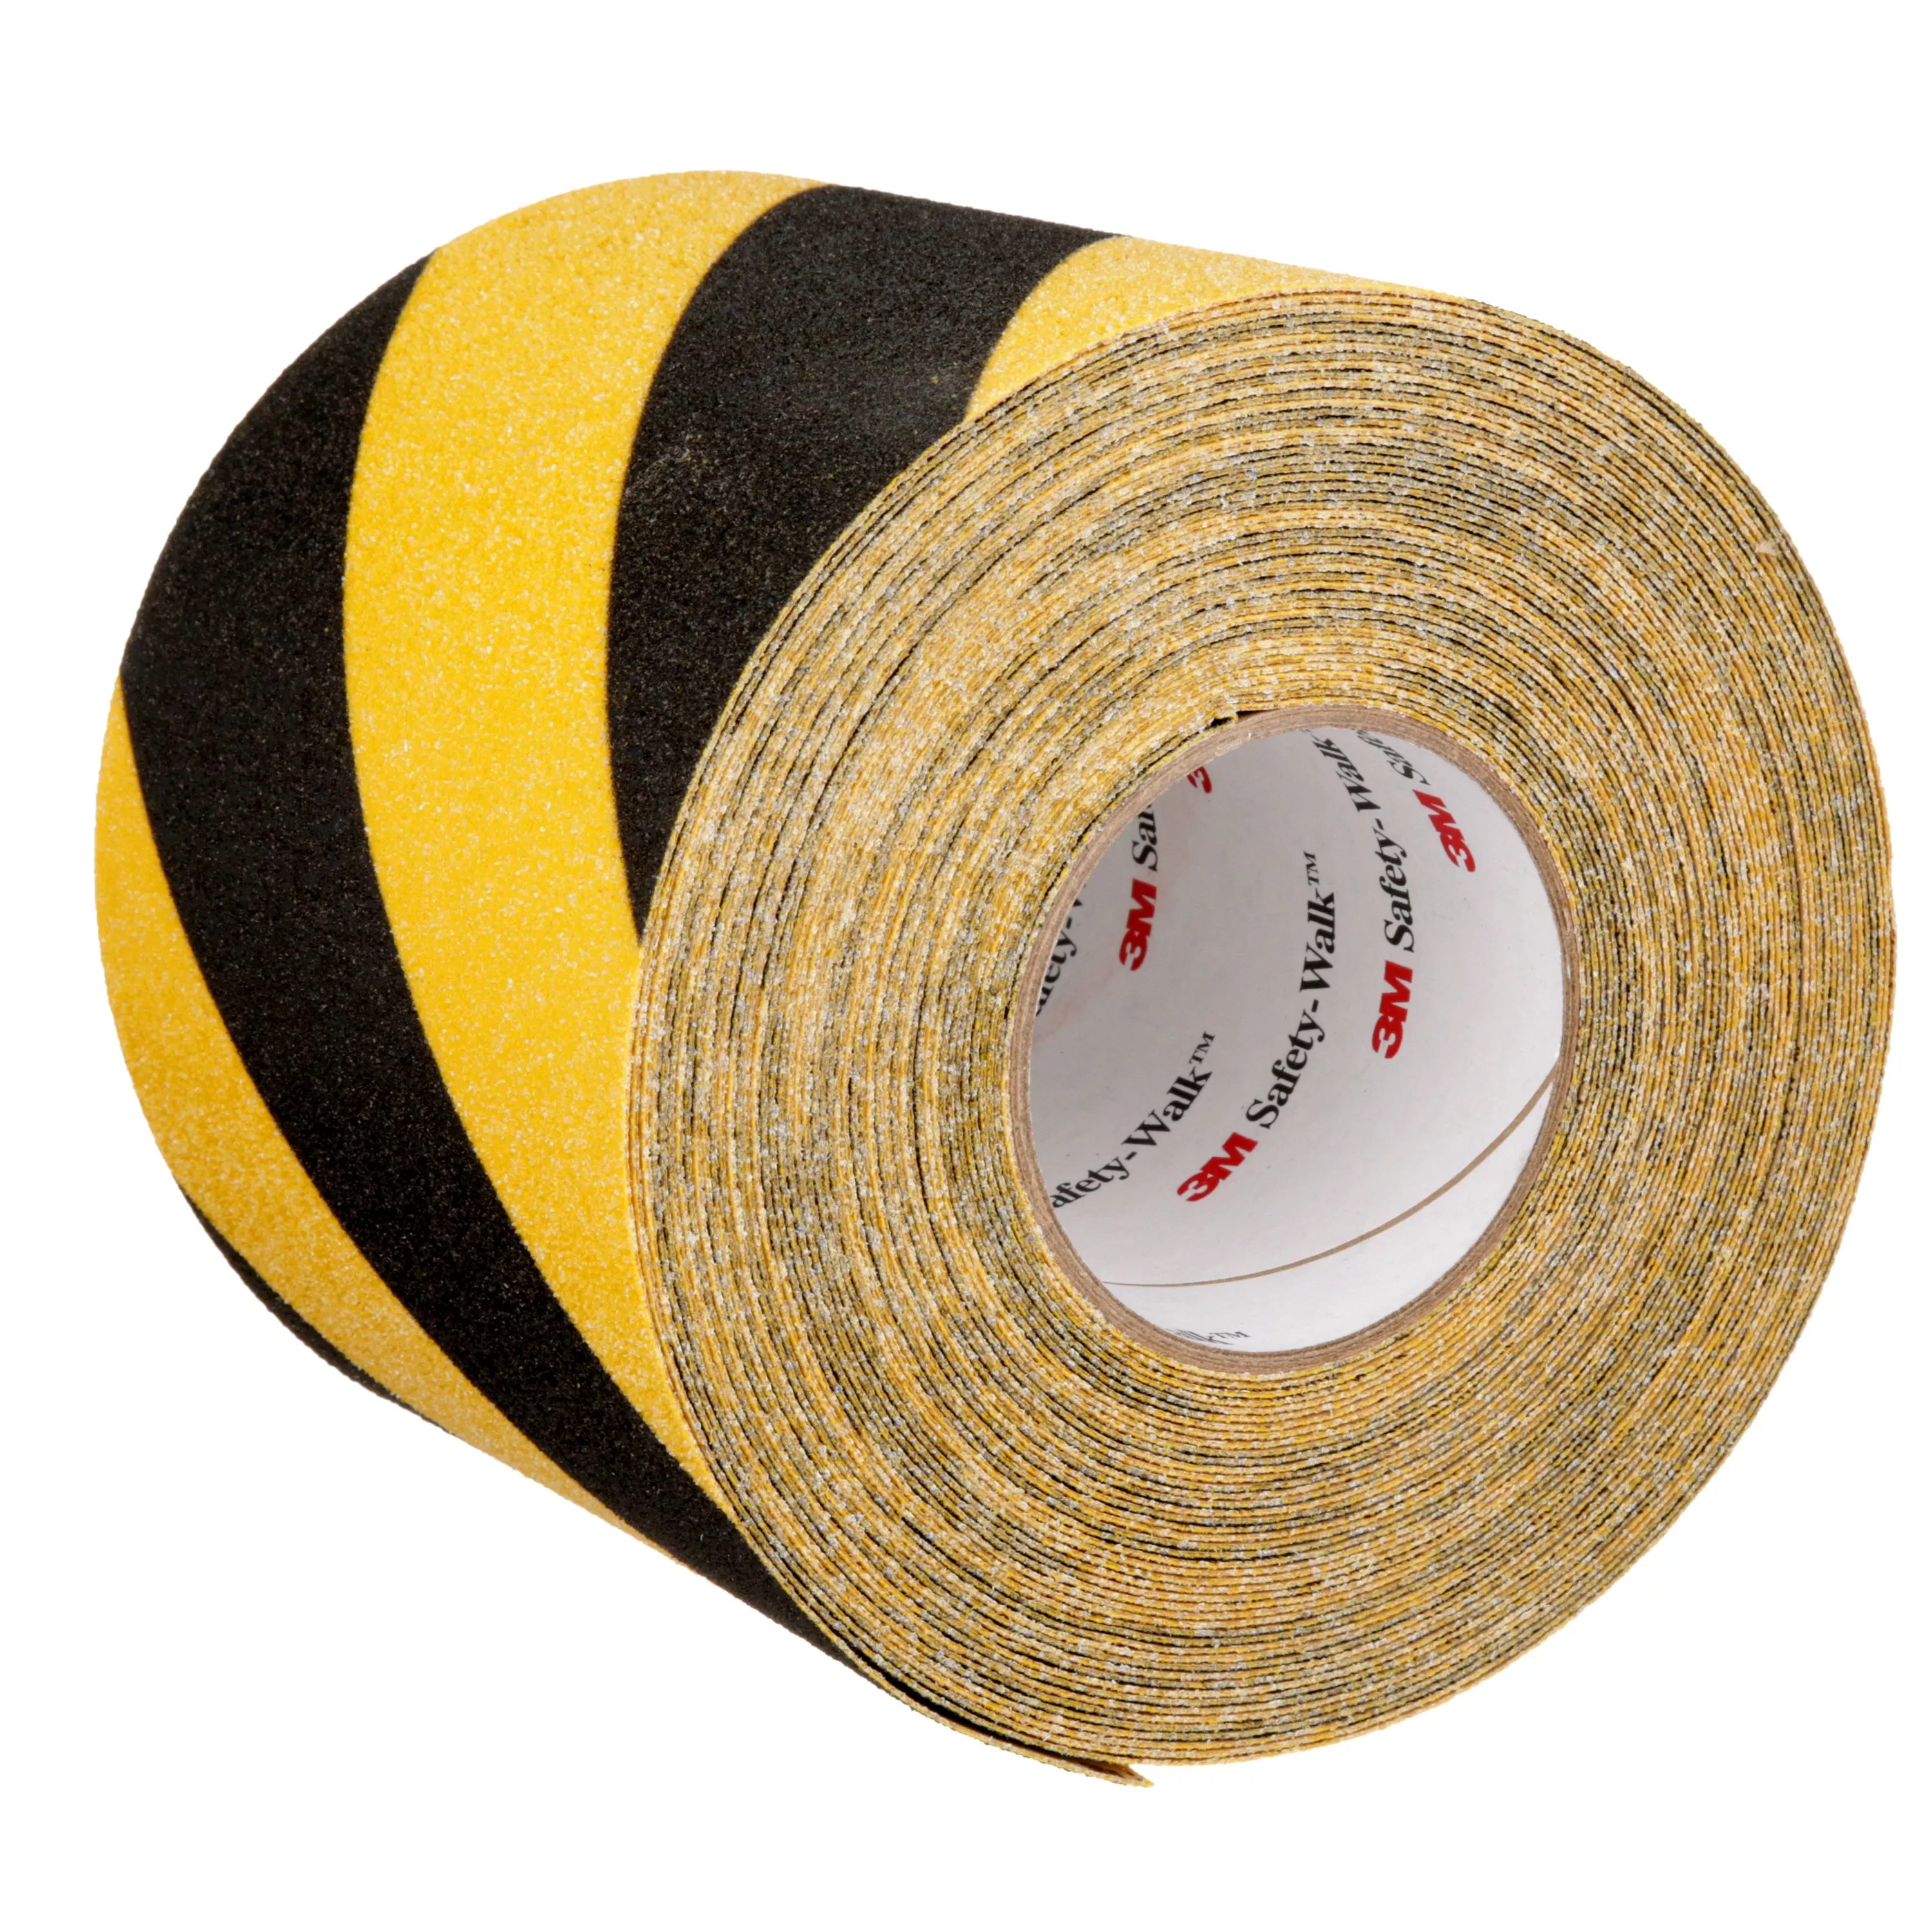 3M™ Safety-Walk™ Slip-Resistant General Purpose Tapes & Treads 613,
Black/Yellow Stripe, 6 in x 60 ft, Roll, 1/Case